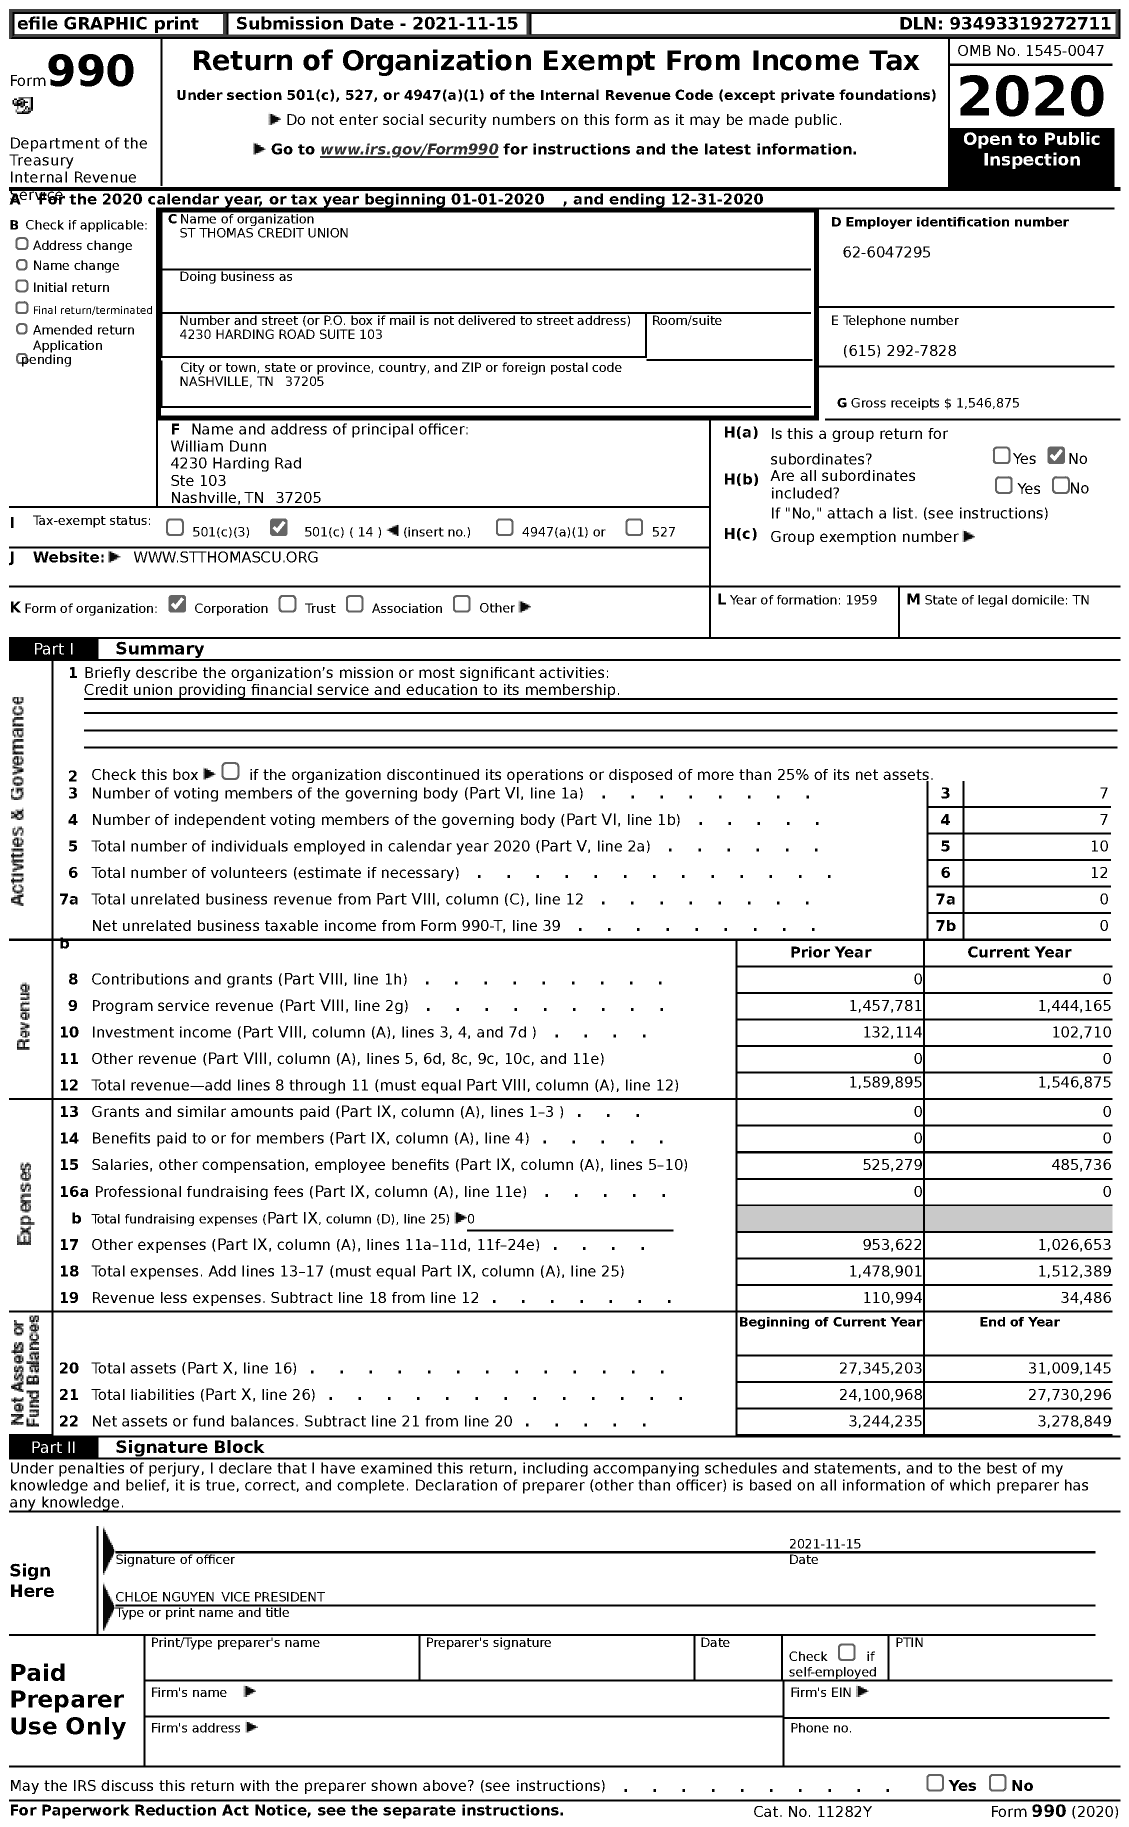 Image of first page of 2020 Form 990 for St Thomas Credit Union